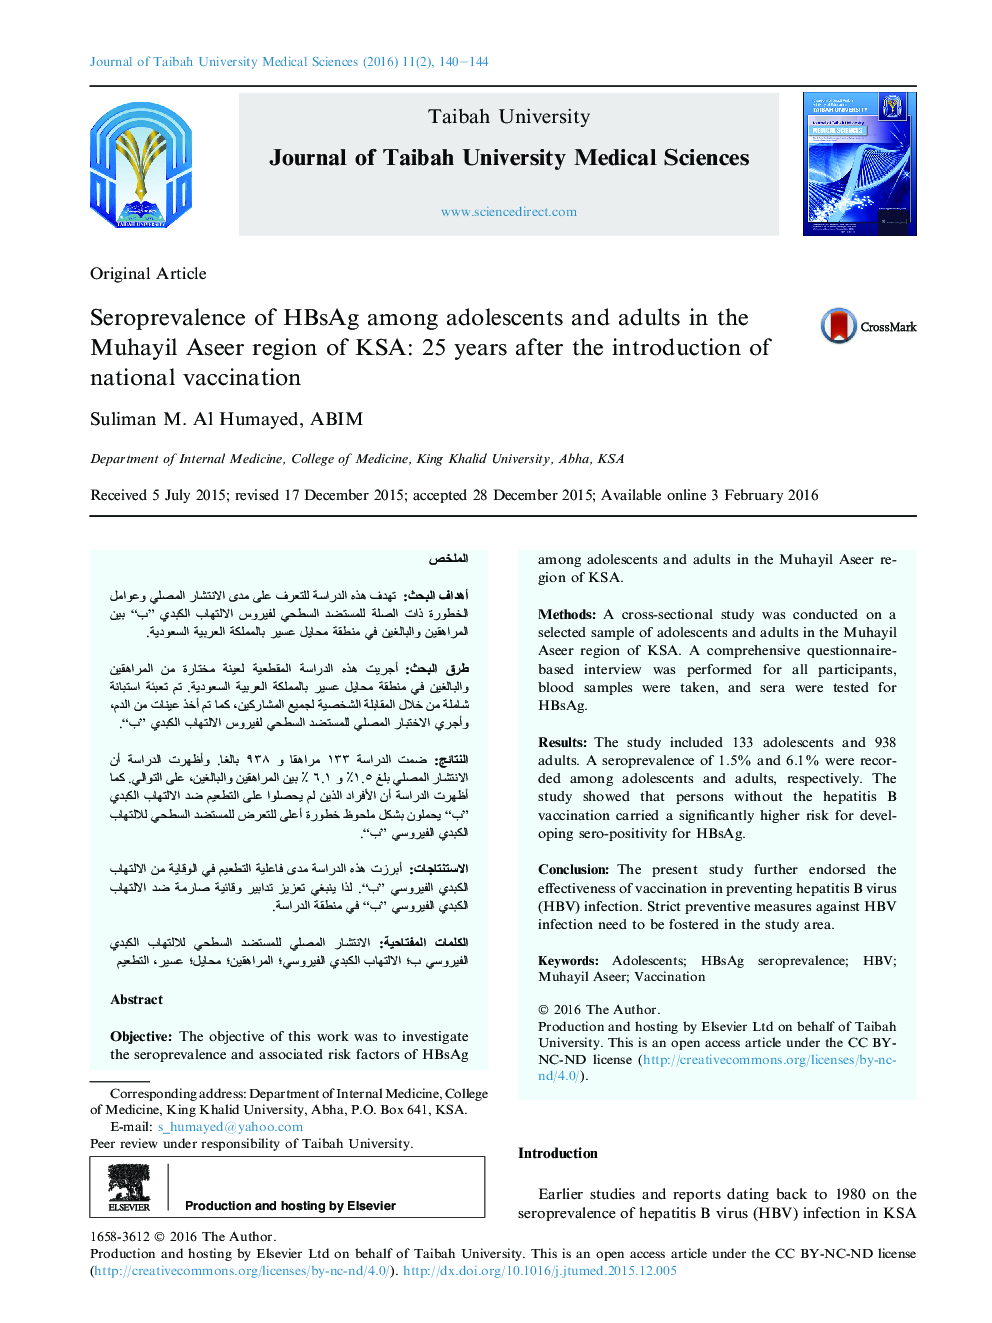 Seroprevalence of HBsAg among adolescents and adults in the Muhayil Aseer region of KSA: 25 years after the introduction of national vaccination 